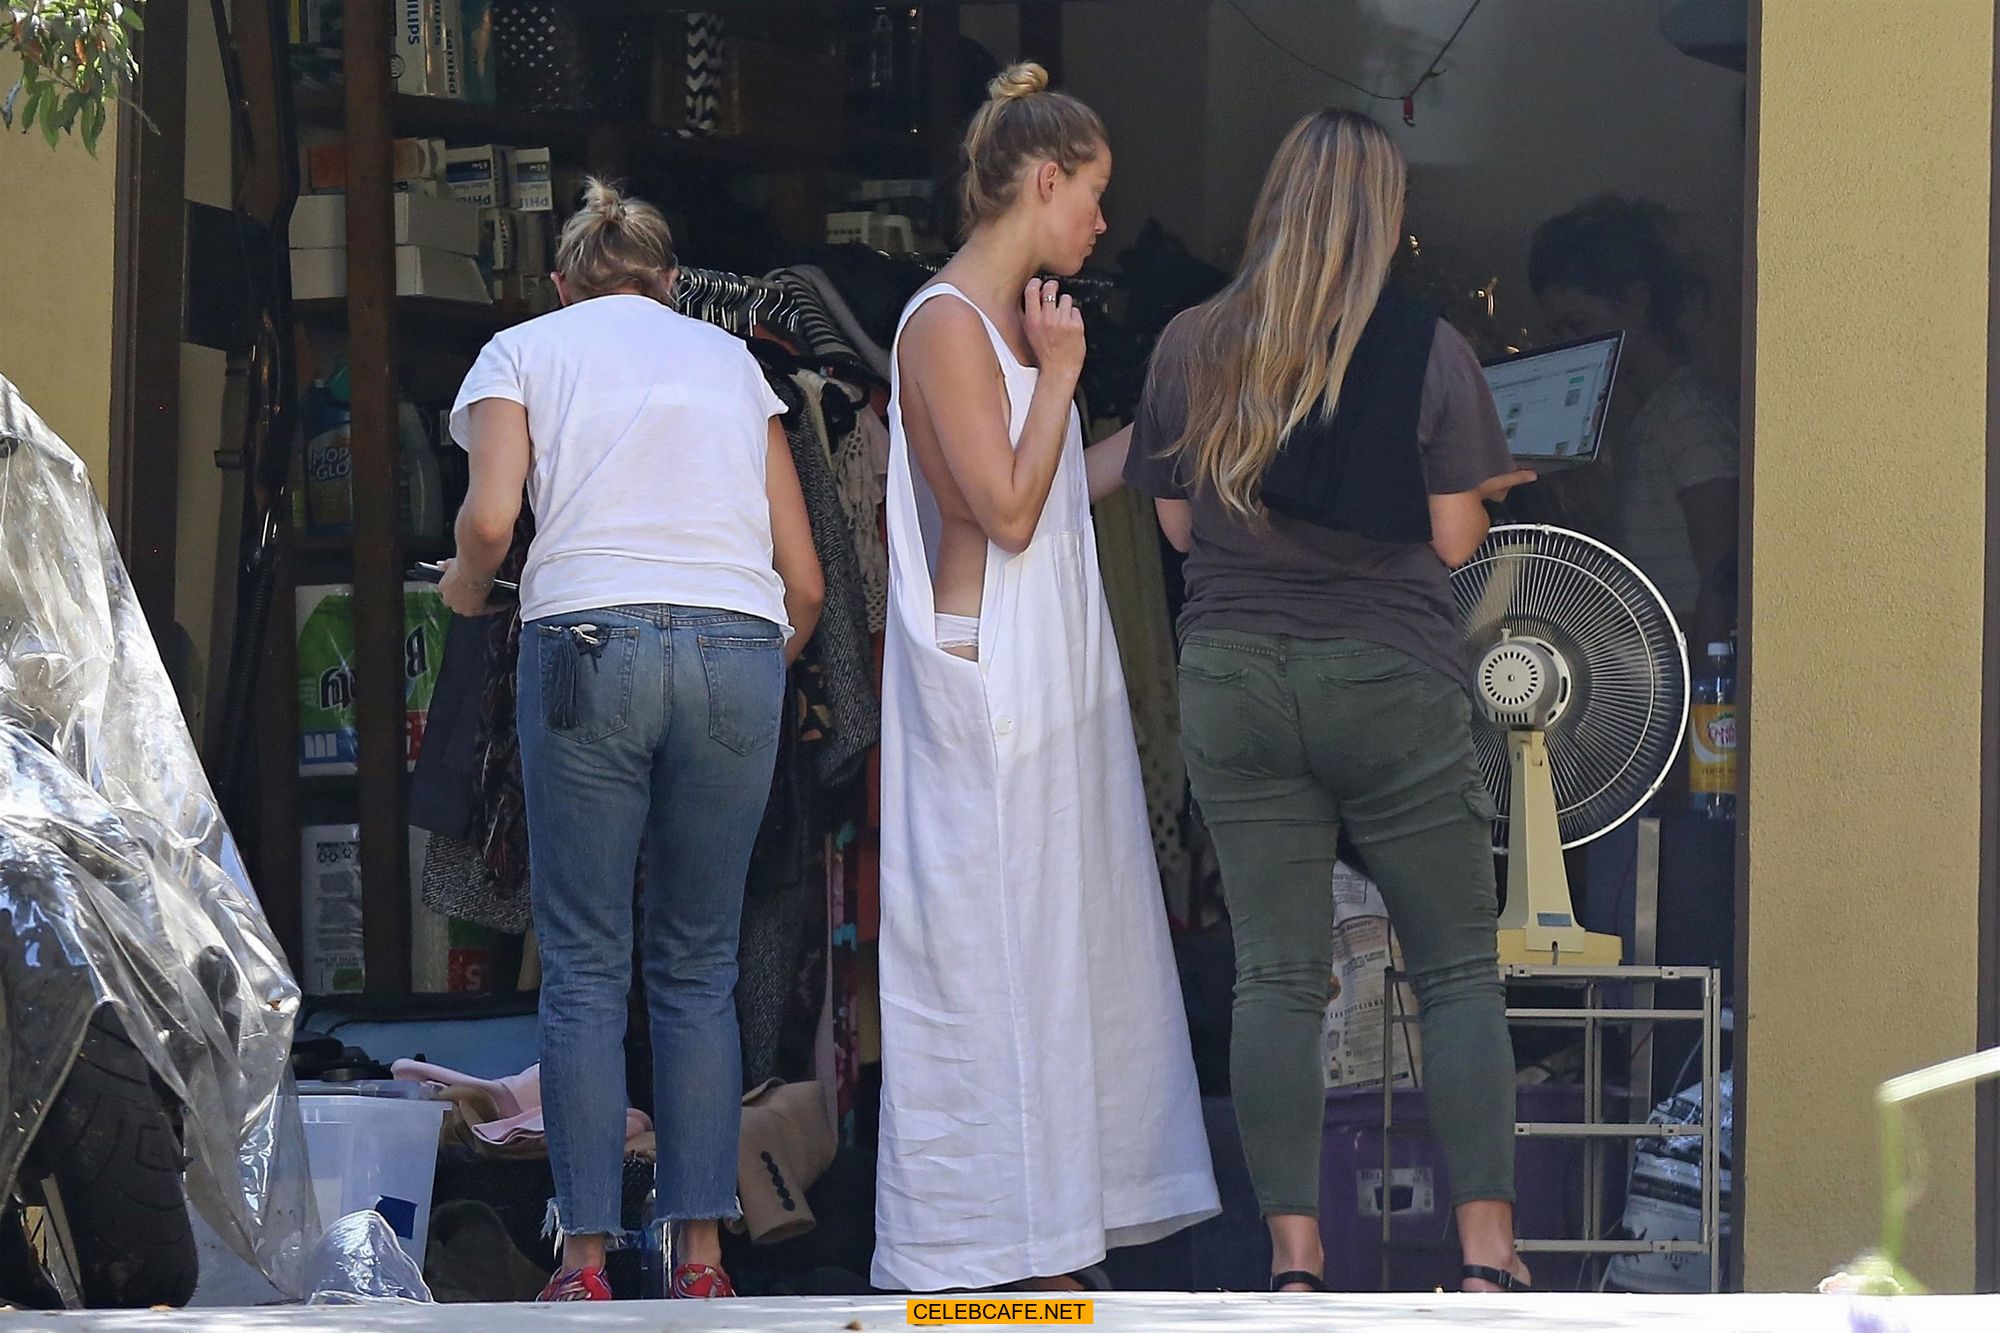 amber_heard_has_a_nip-slip_while_cleaning_out_her_garage_in_la_07302018_11.jpg